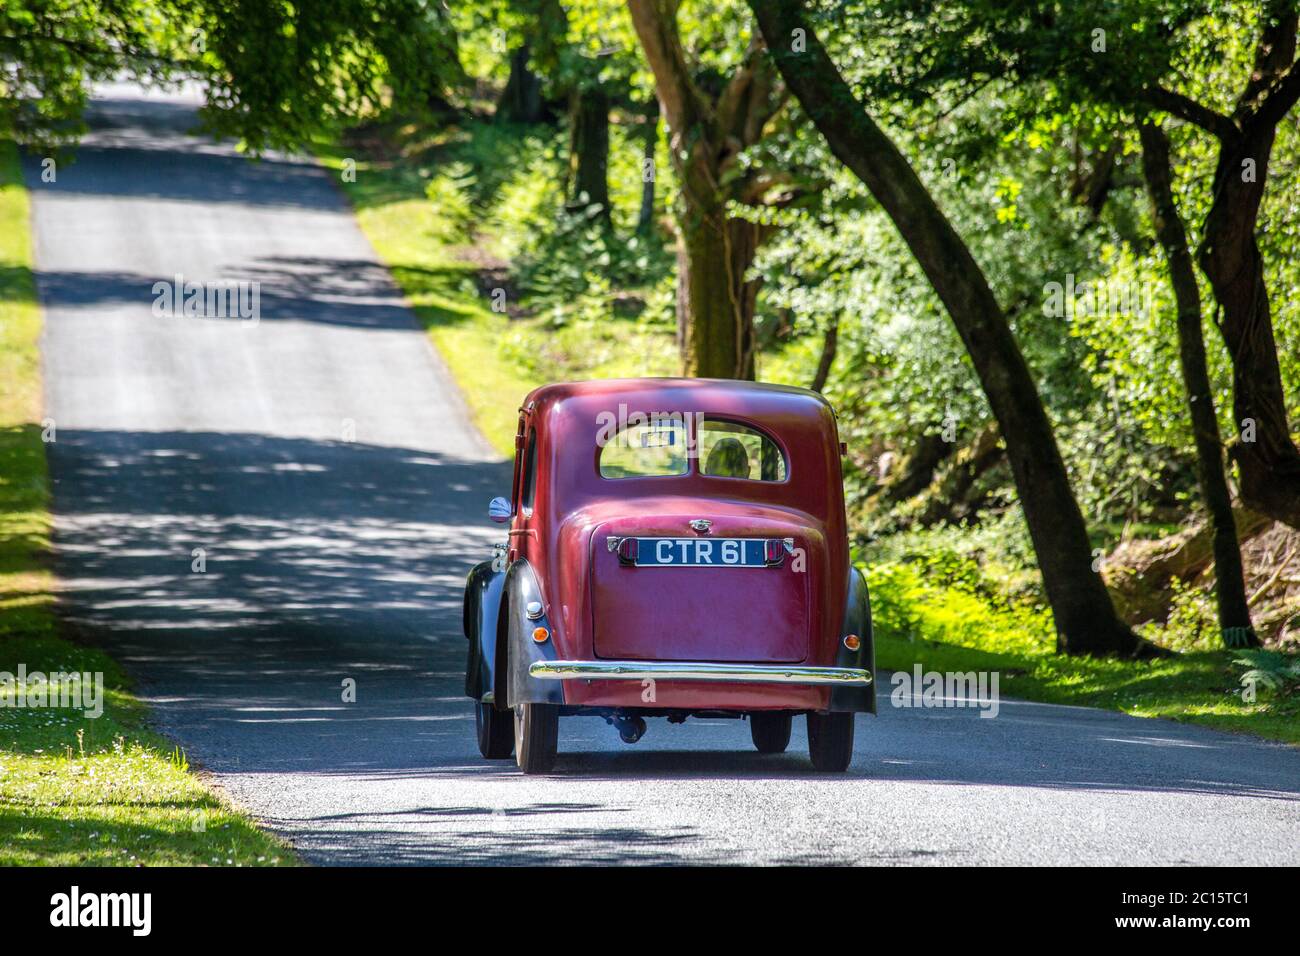 Classic Austin Seven Ruby Car driving through the New Forest National Park woodland scene, Hampshire, England Stock Photo